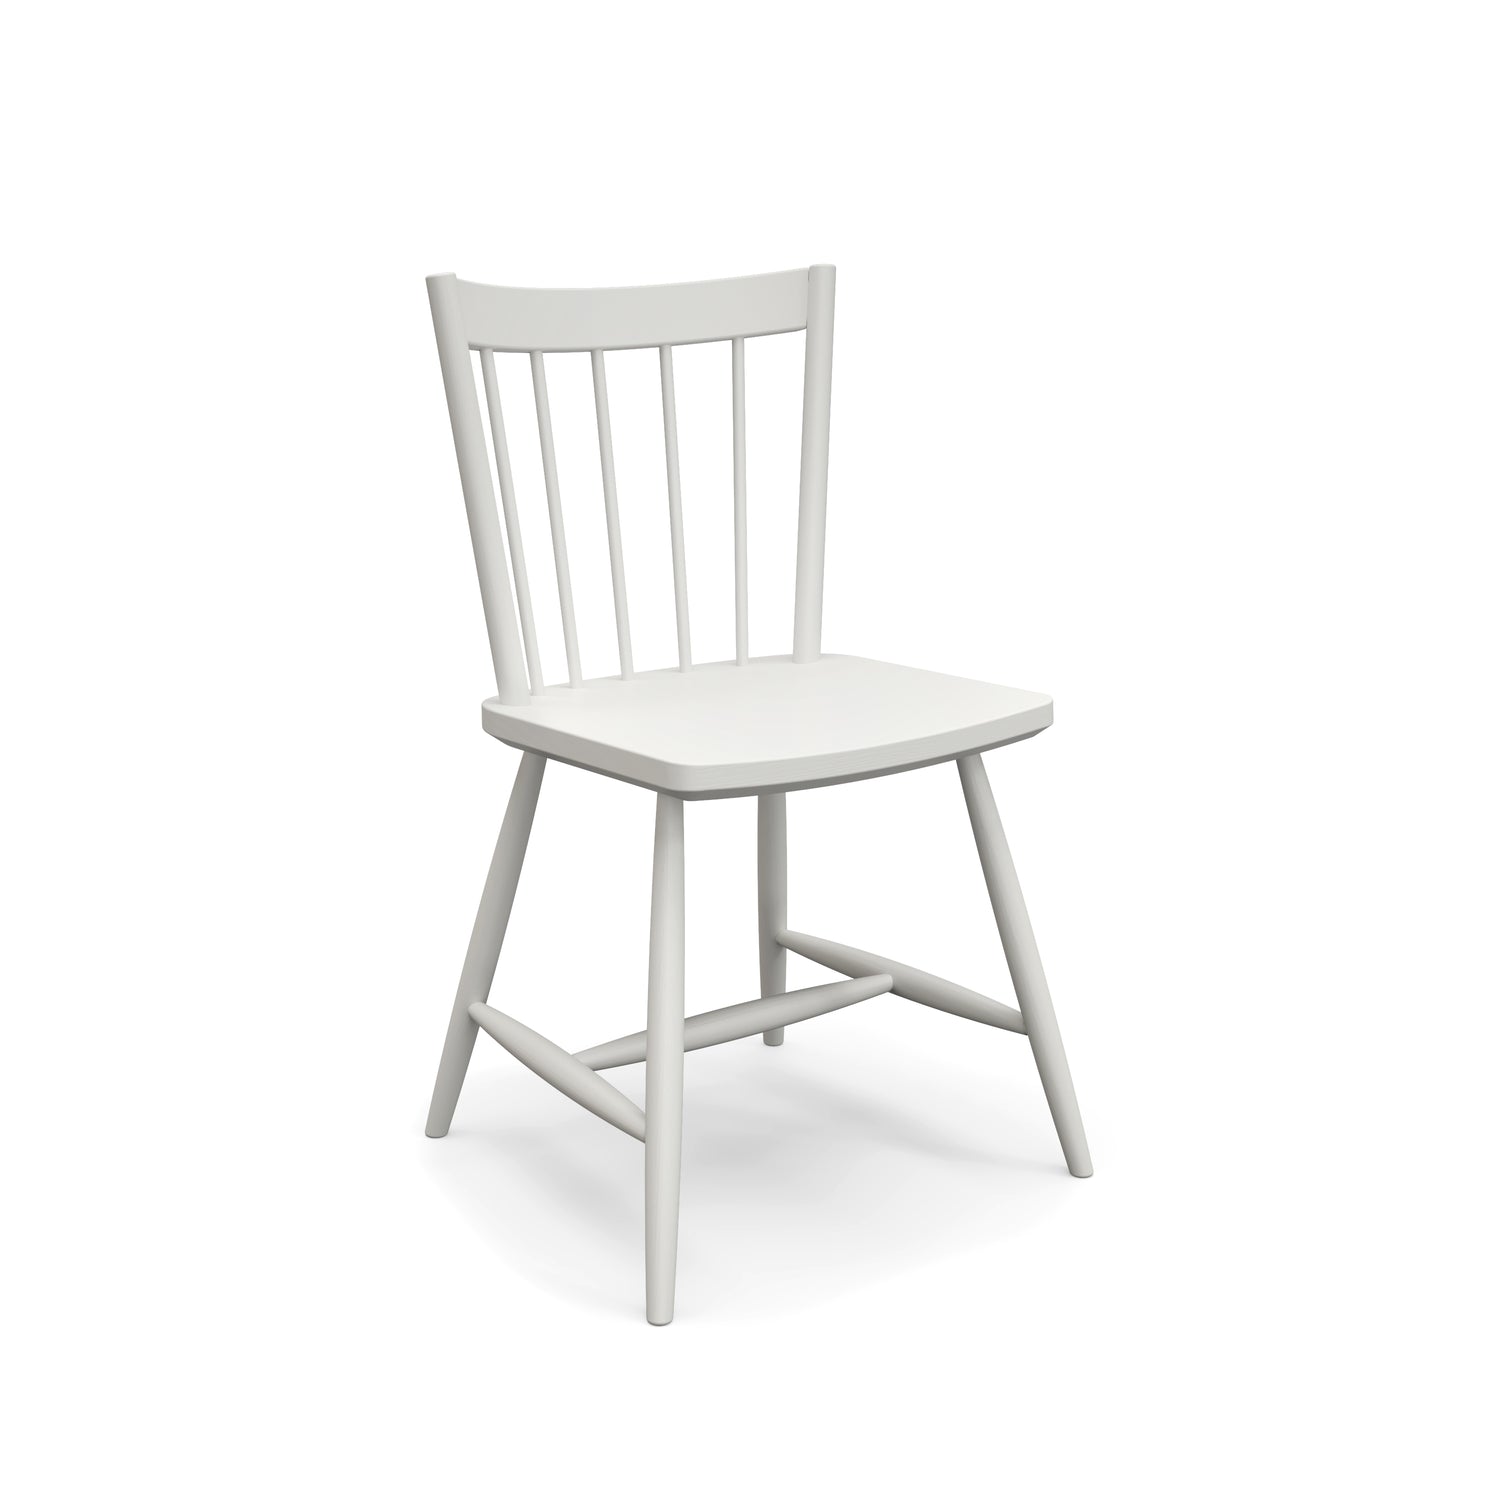 Woodstock & cie solid wood dinning chair